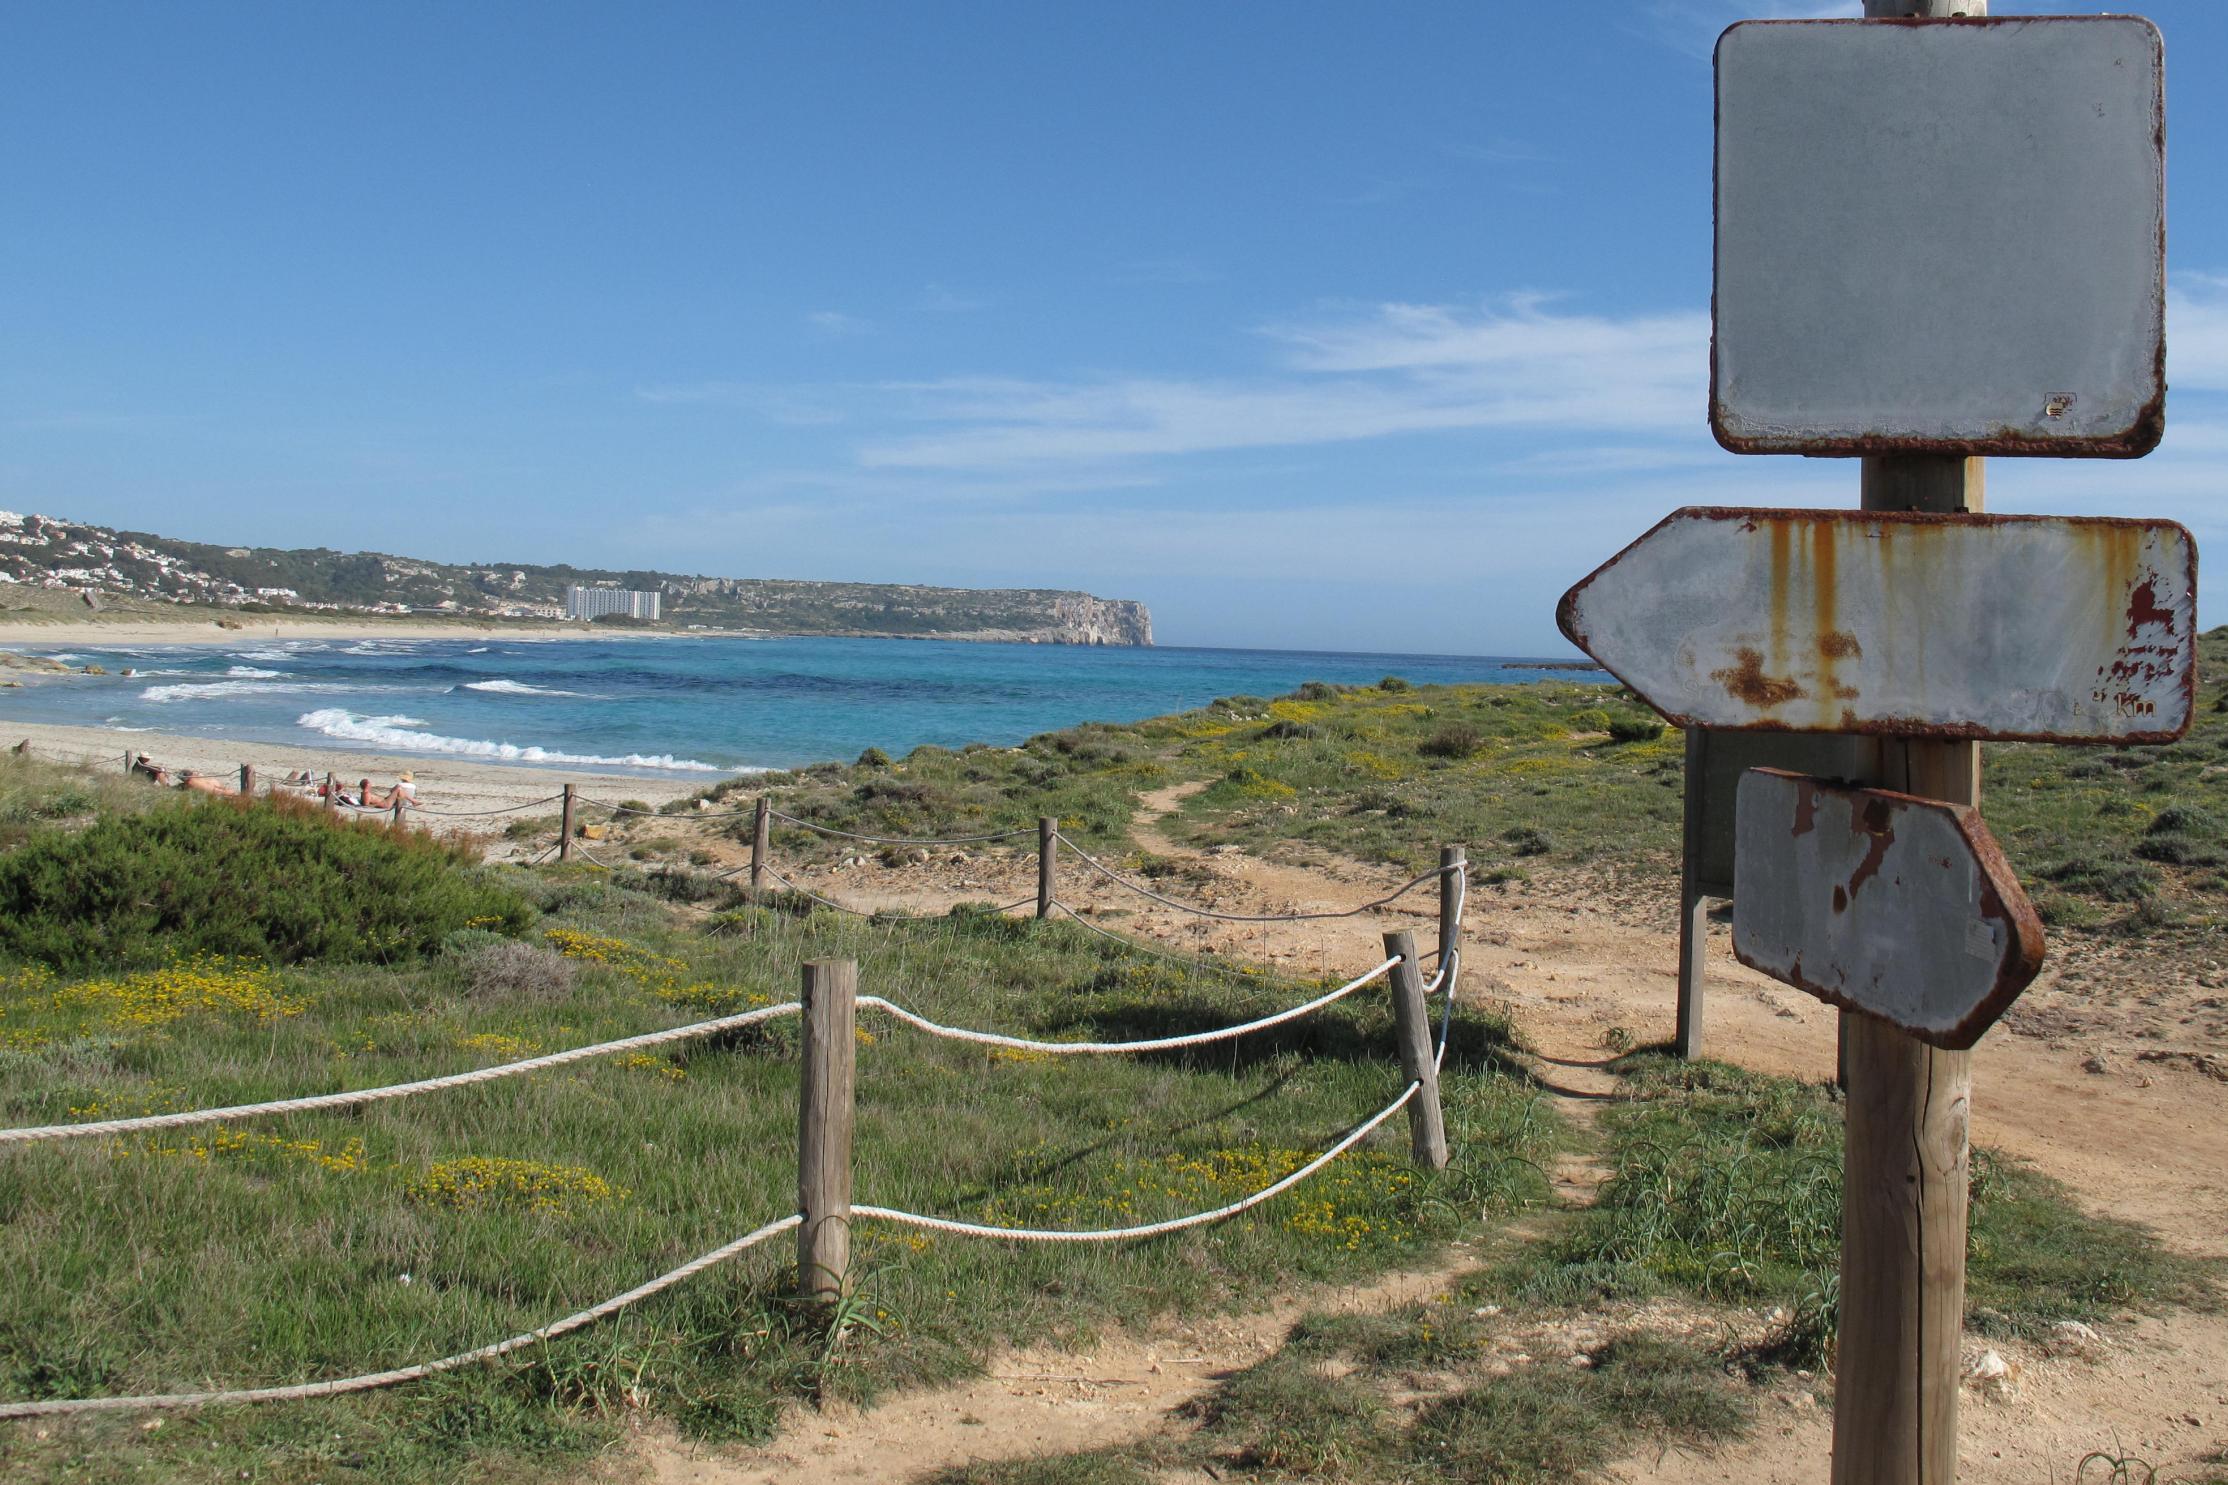 Danger zone? A beach on the south side of Menorca